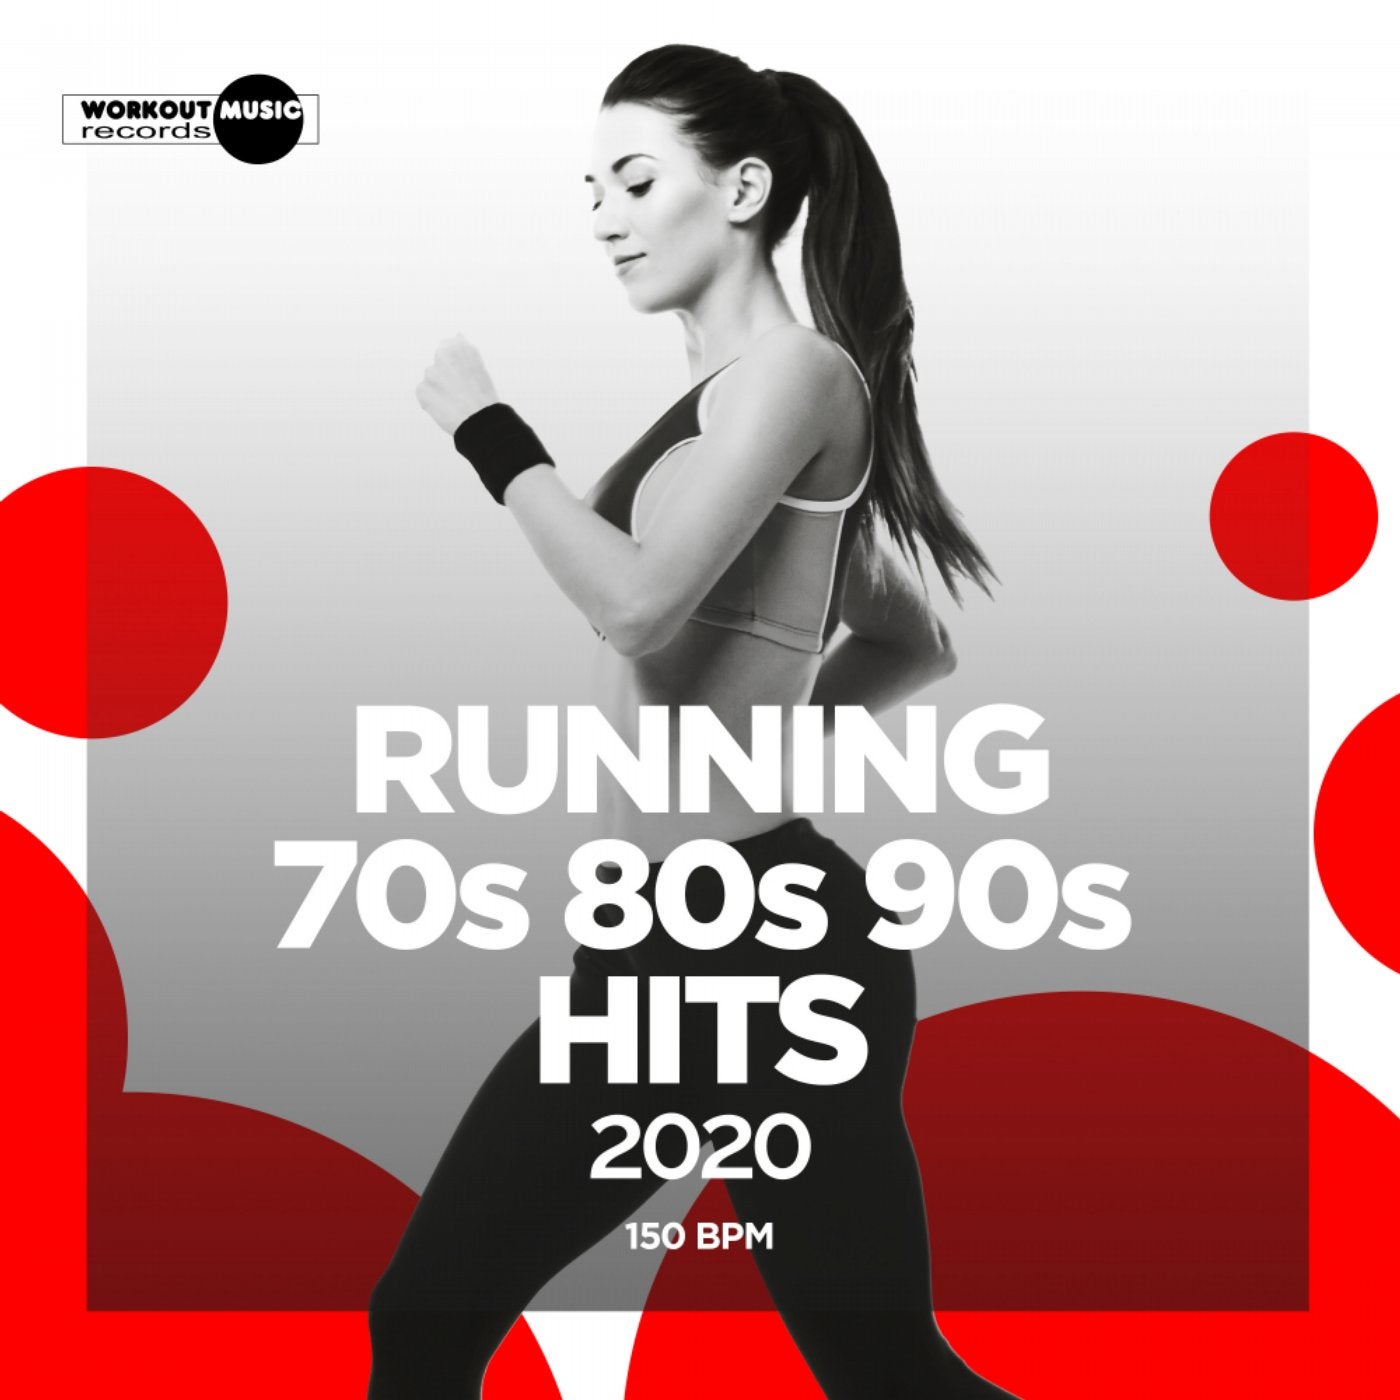 Download Workout Music album songs: 70s & 80s Workout! Mix! Playlist